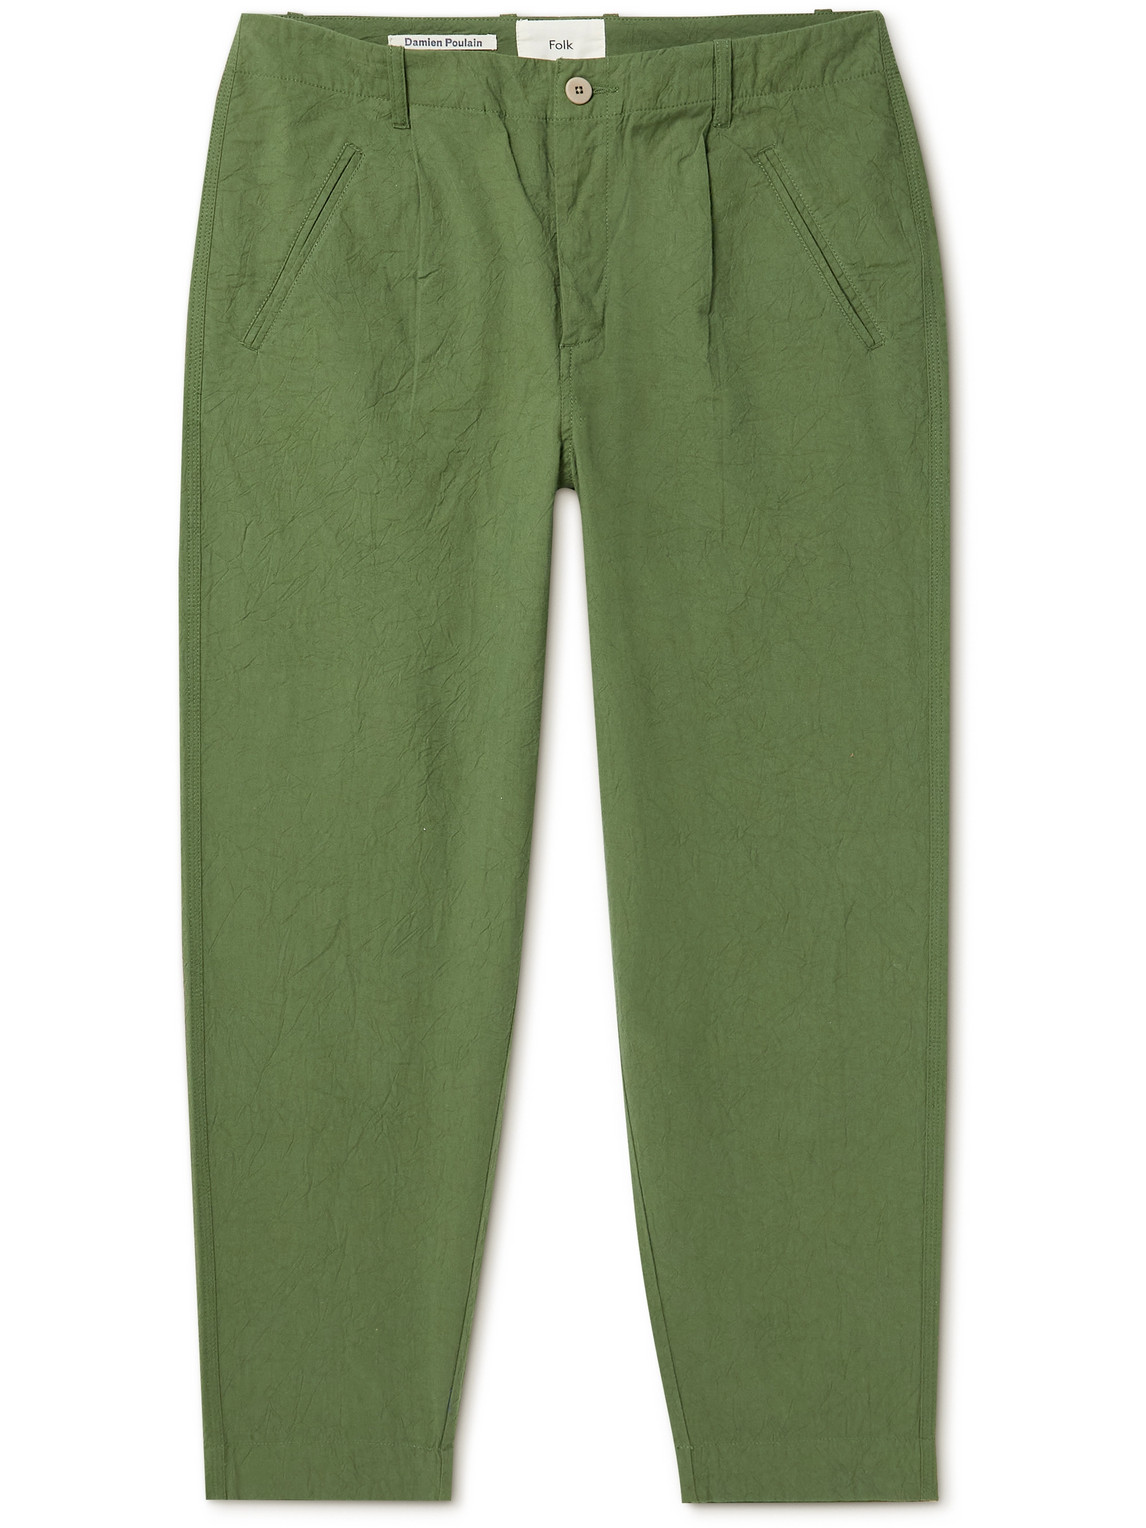 Folk Damien Poulain Assembly Tapered Crinkled-cotton Trousers In Green